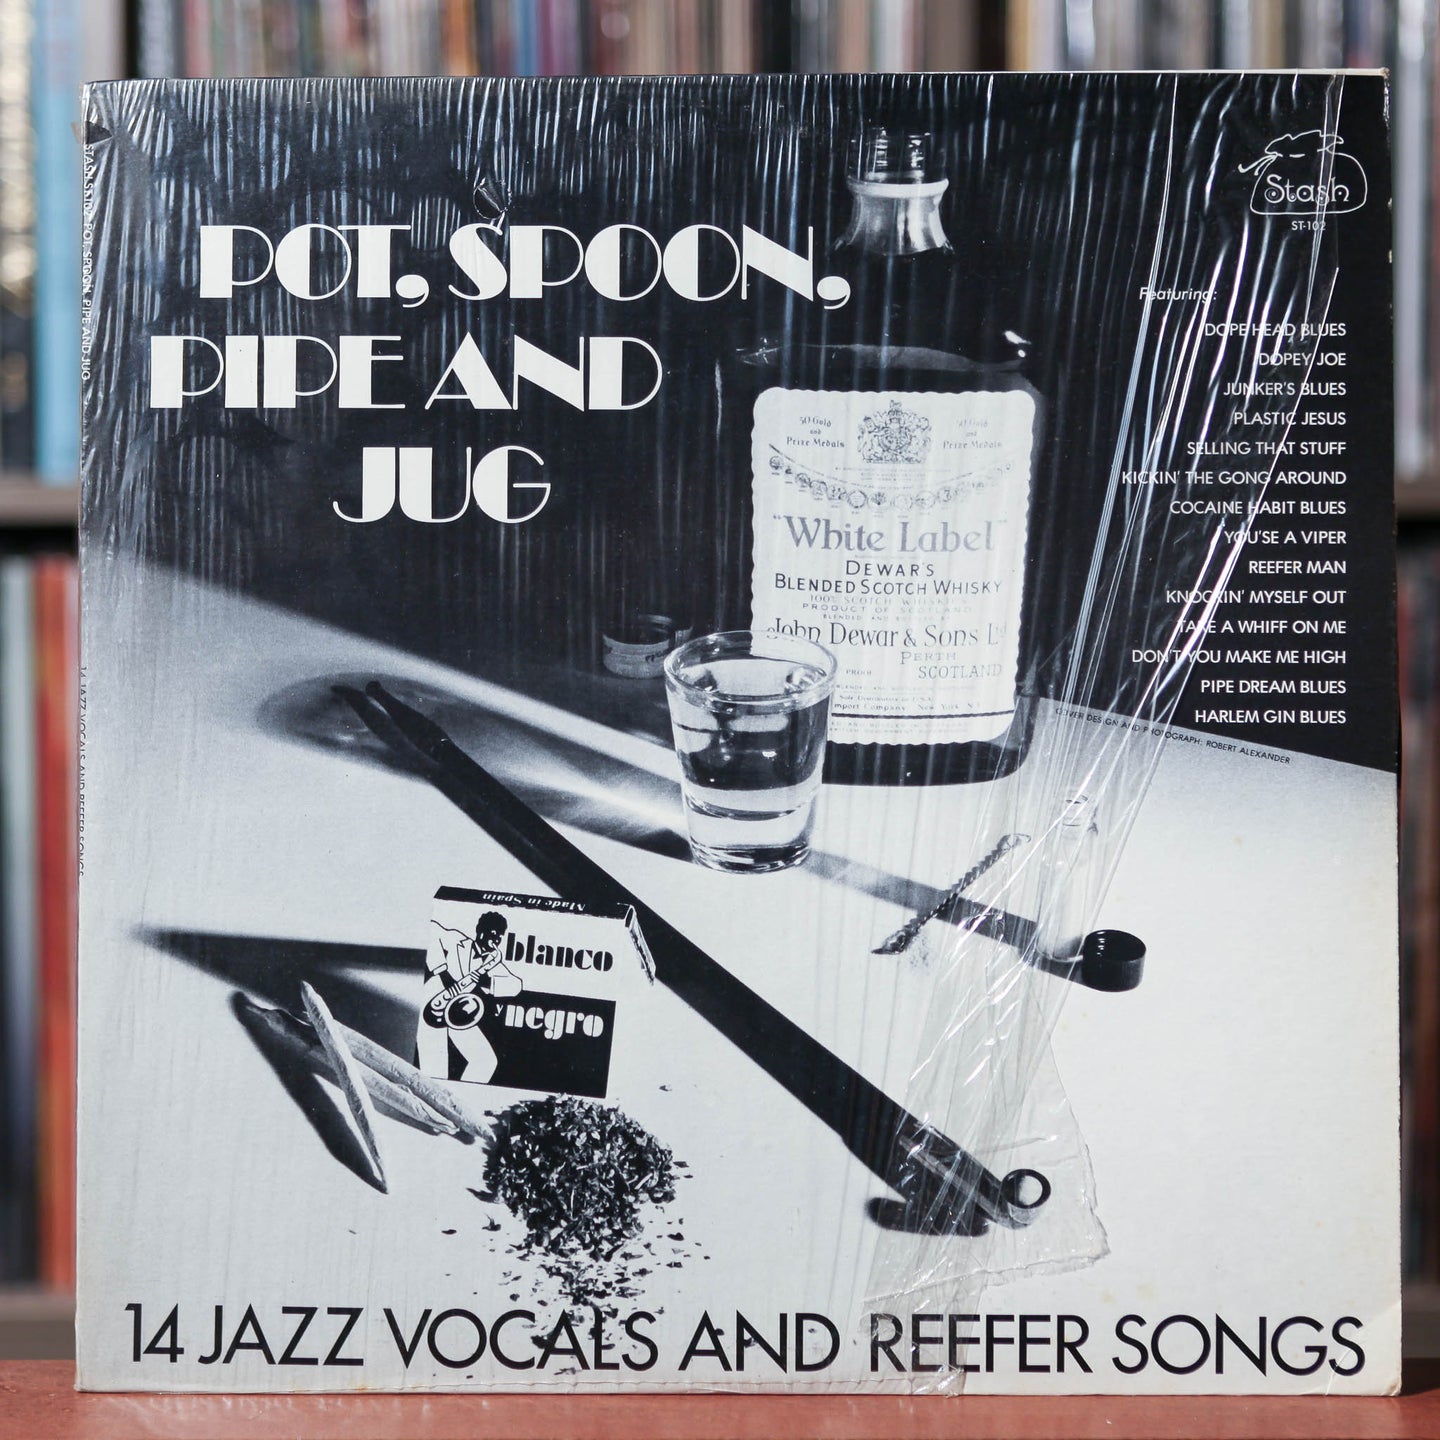 Pot, Spoon, Pipe And Jug-14 Jazz Vocals And Reefer Songs - Various - 1976 Stash, VG+/VG+ w/Shrink